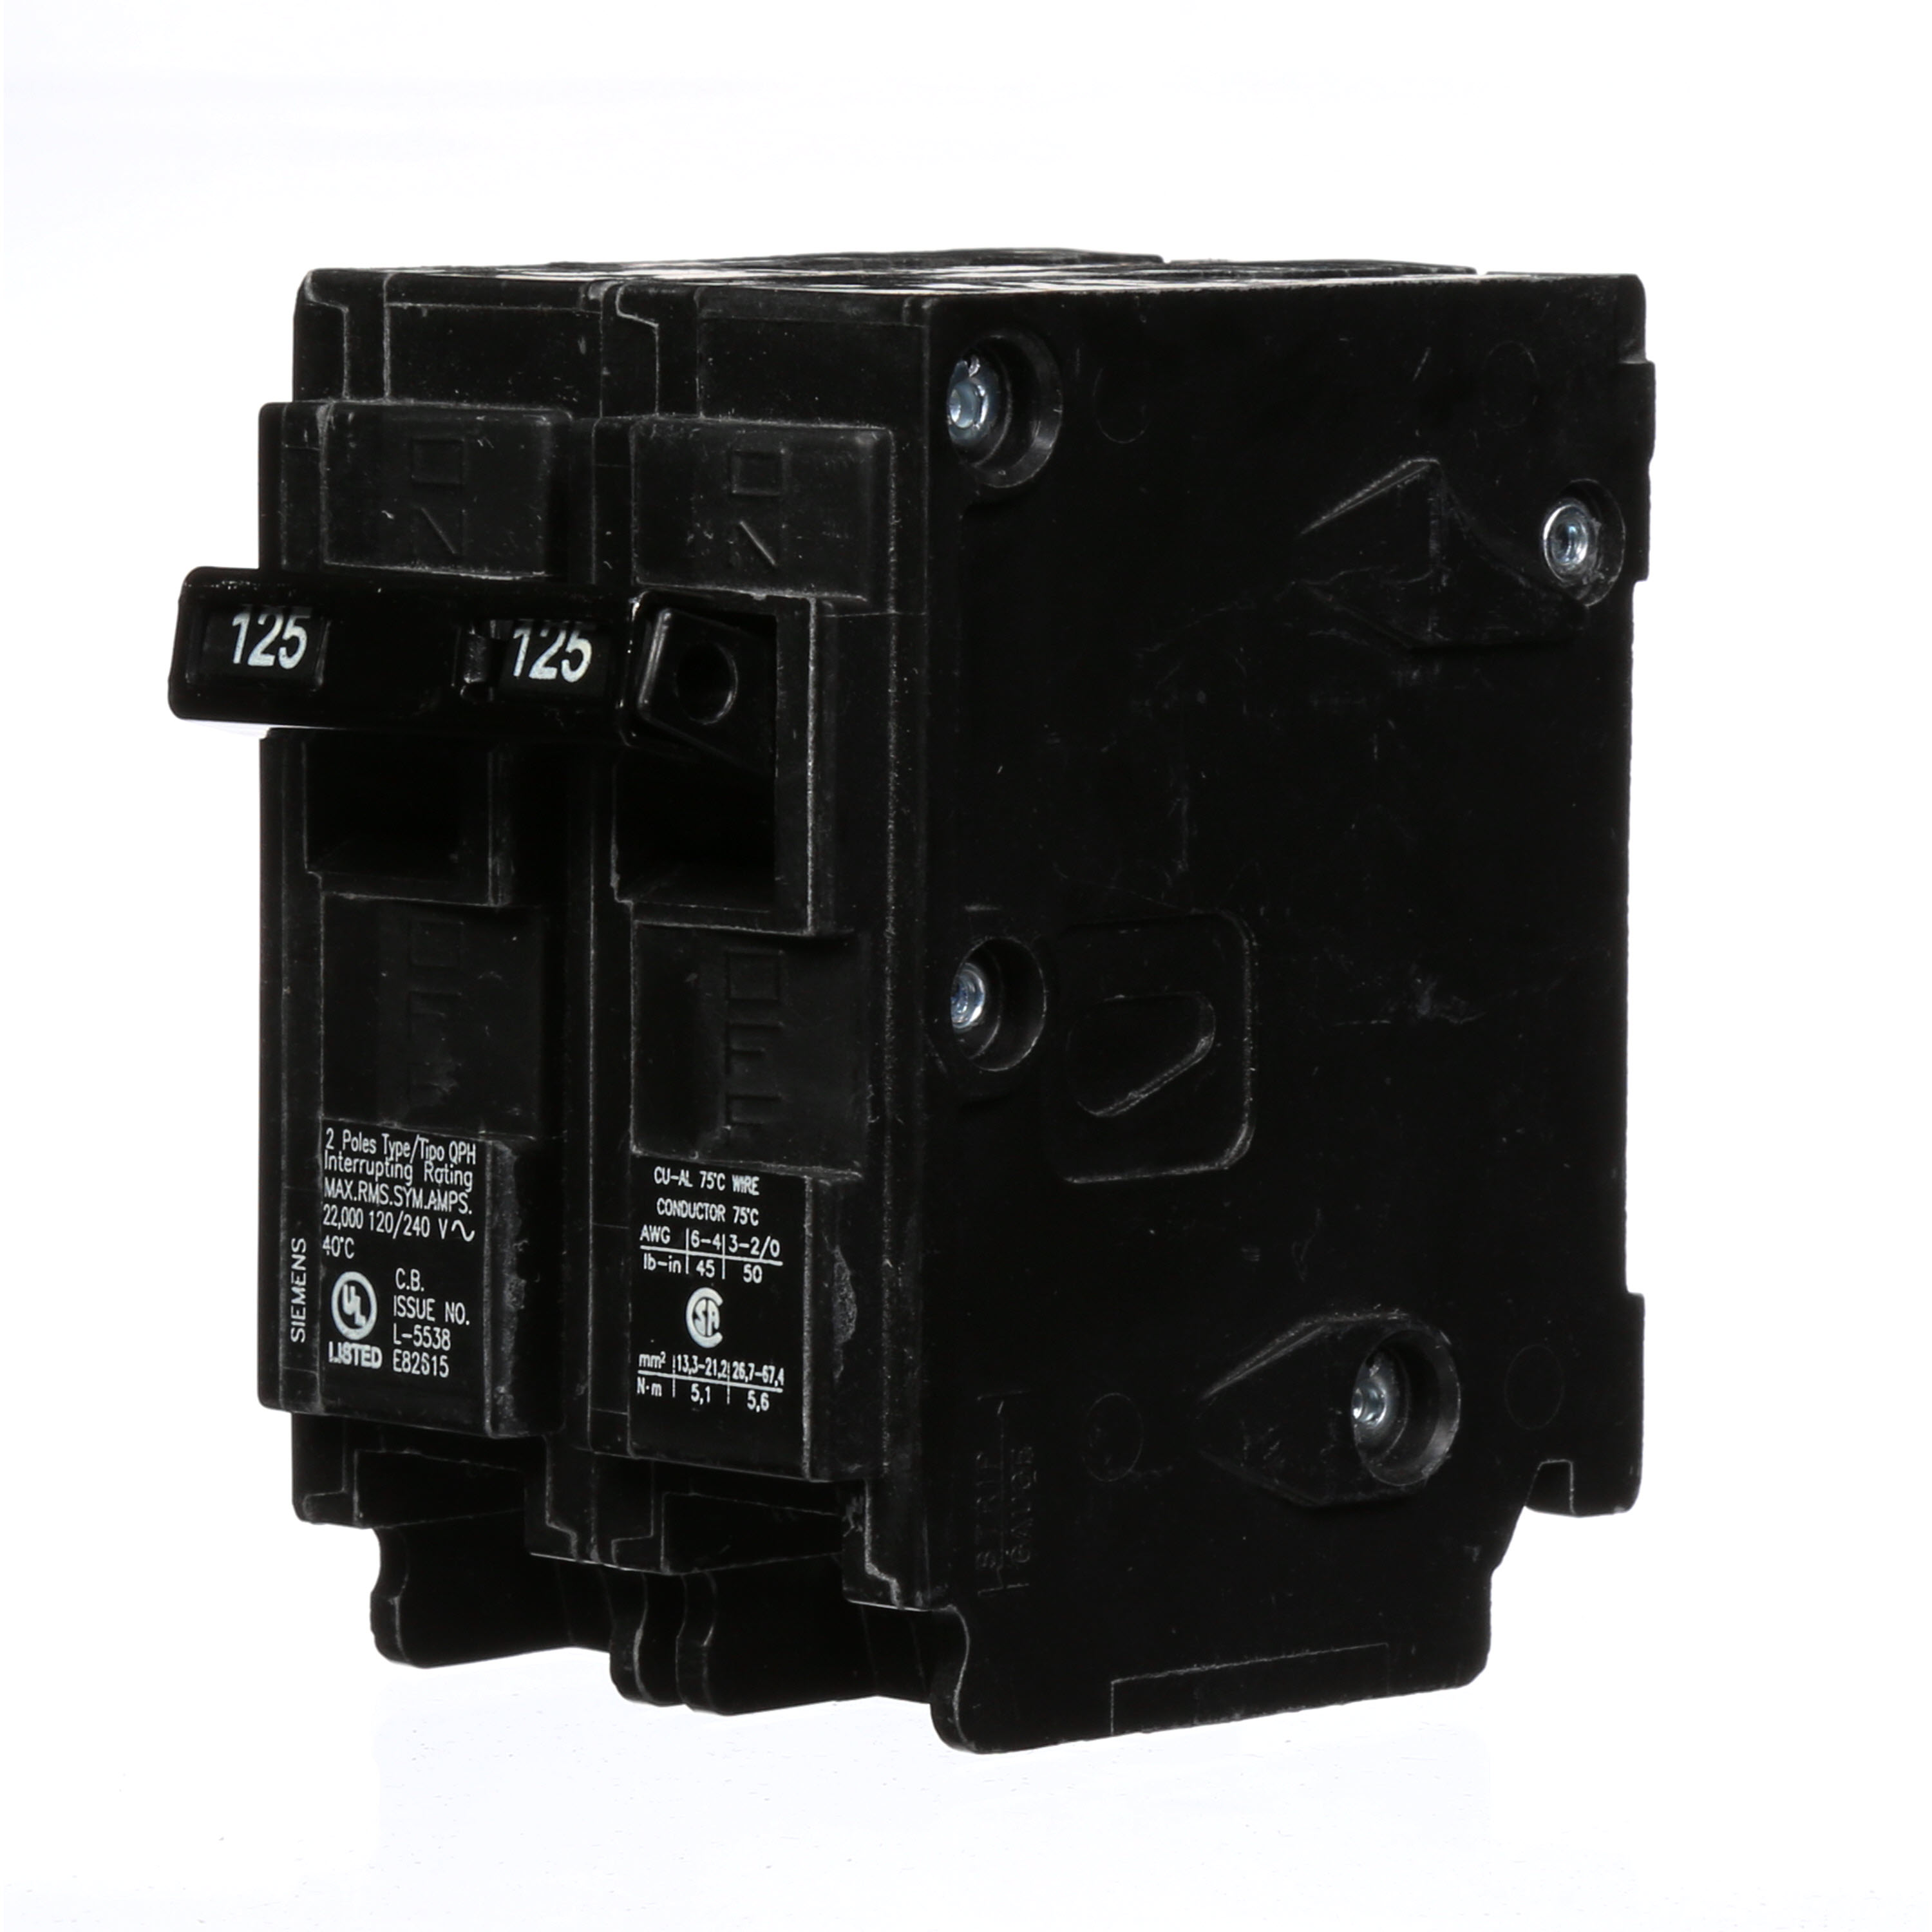 Siemens Low Voltage Residential Circuit Breakers Miniature Thermal Mag Circuit Breakers - Type QP/MP, 2-Pole, 120/240VAC are Circuit Protection Load Center Mains, Feeders, and Miniature Circuit Breakers. Type QP/MP Application Electrical Distribution Standard UL 489 Voltage Rating 120/240V Amperage Rating 125A Trip Range Thermal Magnetic Interrupt Rating 22 AIC Number Of Poles 2P